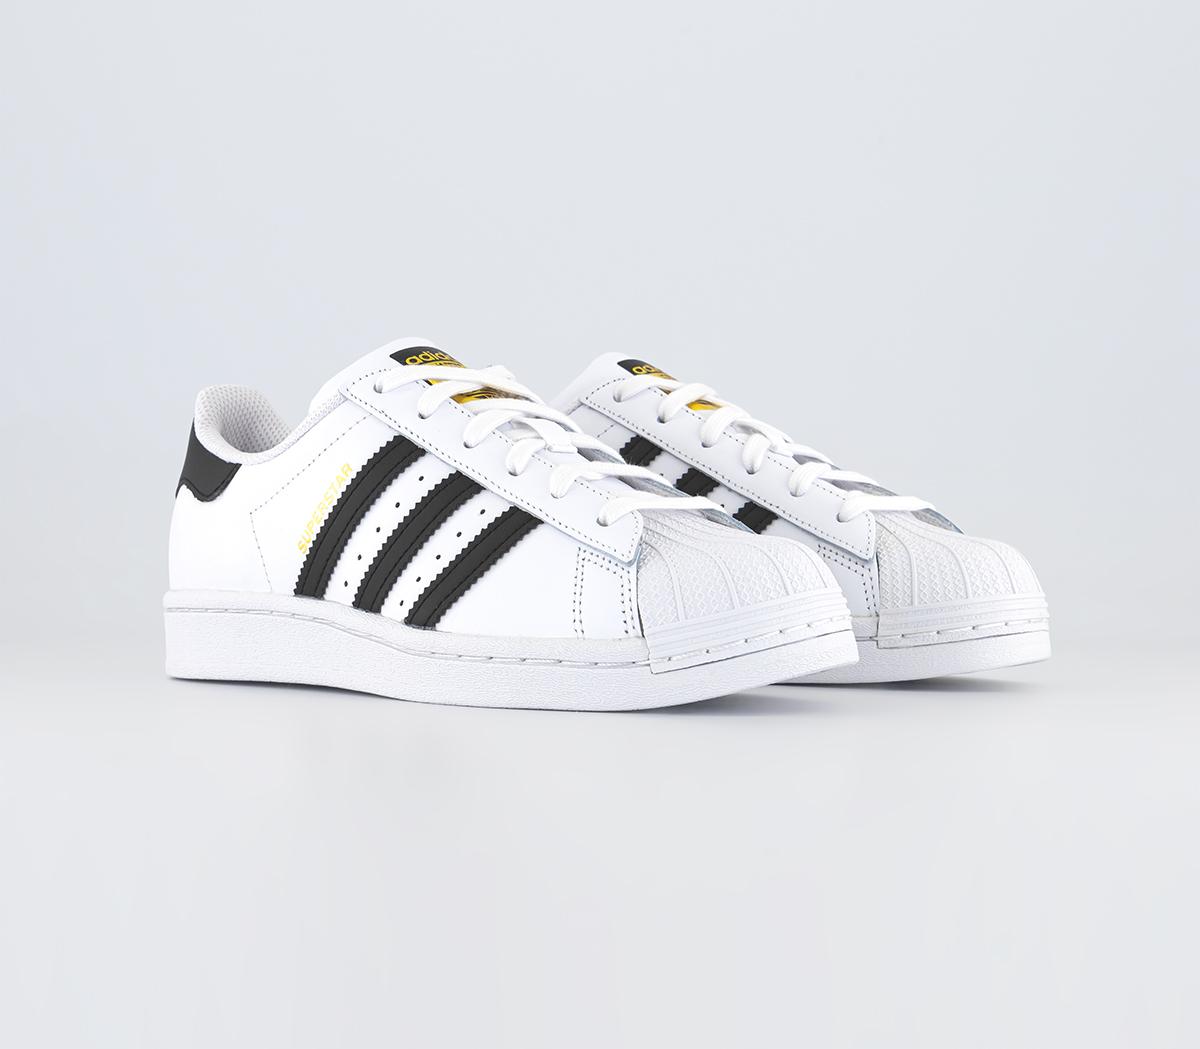 Adidas Superstar Gs Girls White And Black Leather Stripe Trainers, 4